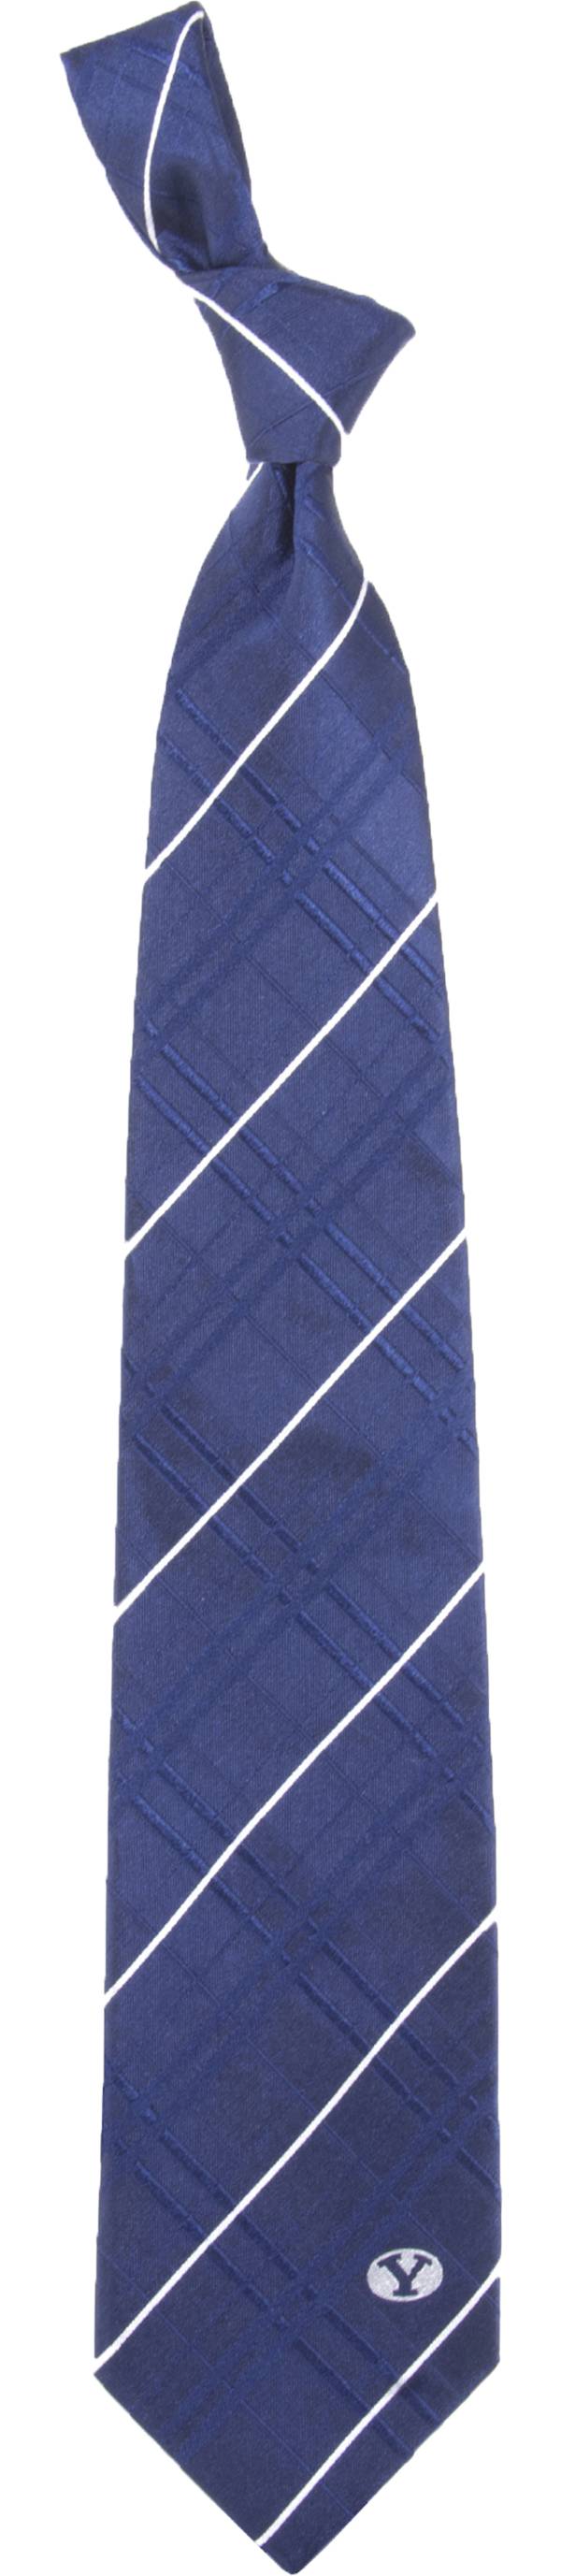 Eagles Wings BYU Cougars Woven Oxford Necktie product image